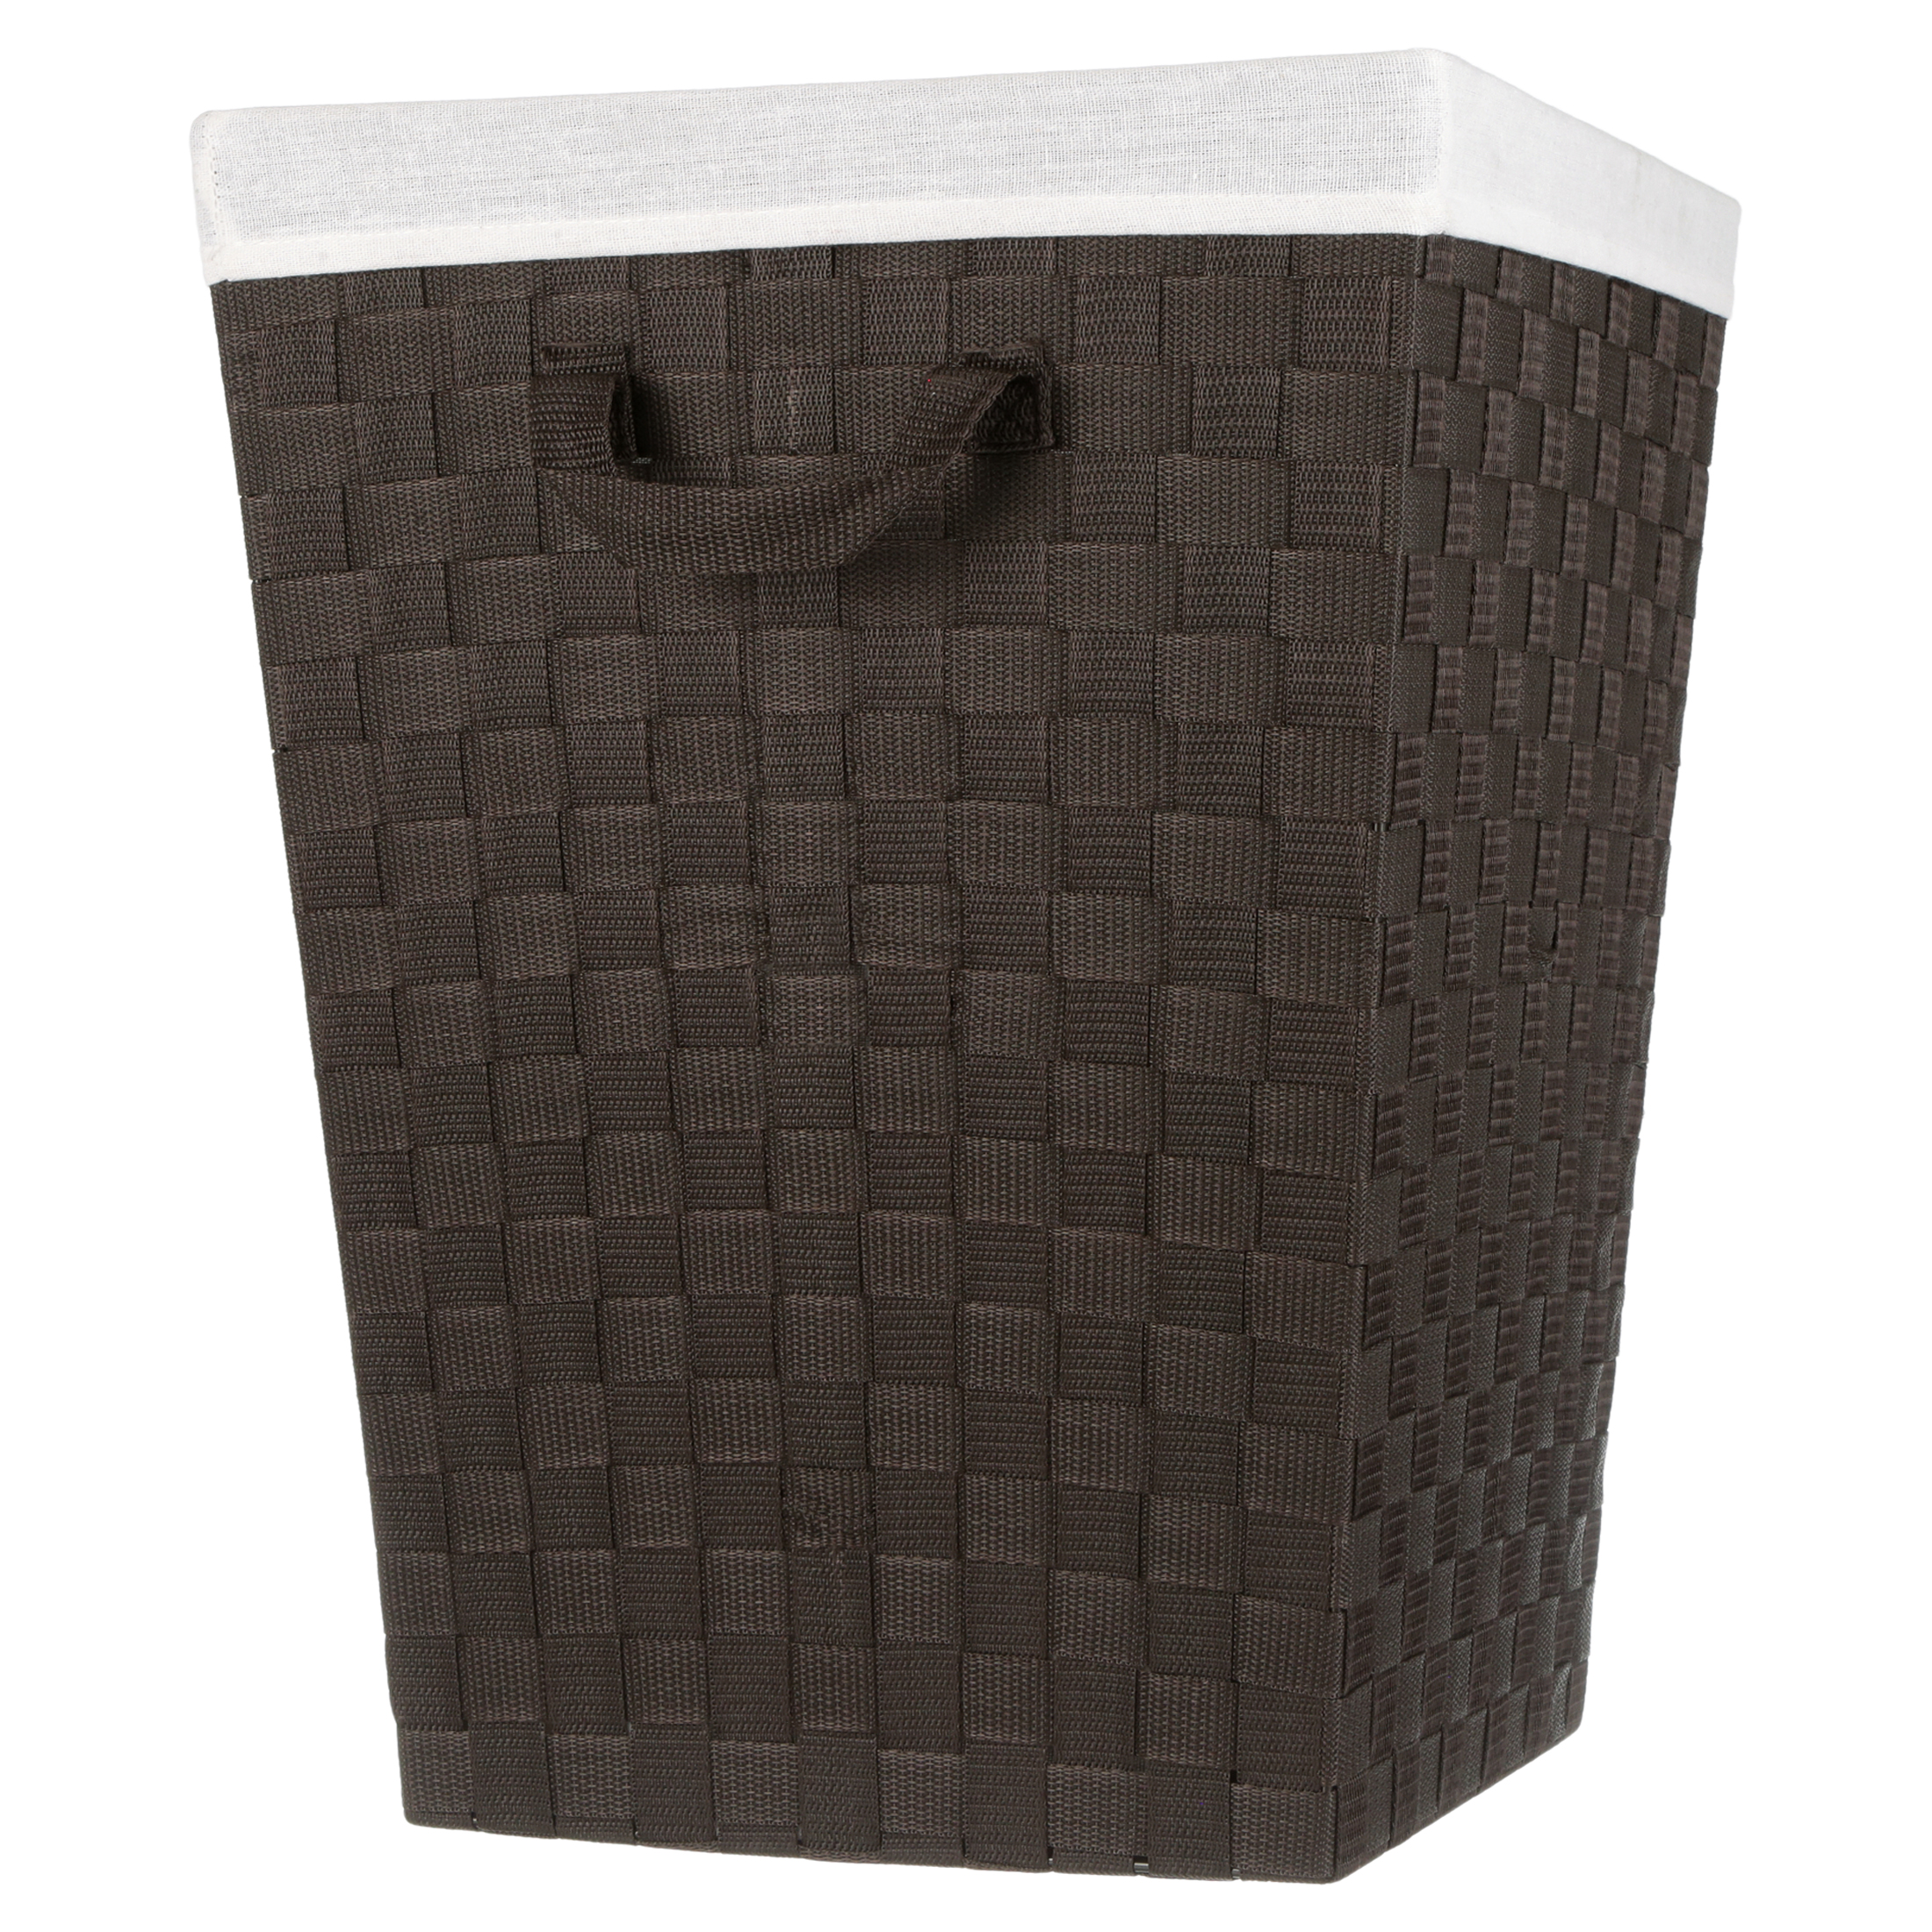 Whitmor Woven Strap Laundry Hamper with Fabric Liner, Espresso - image 7 of 8